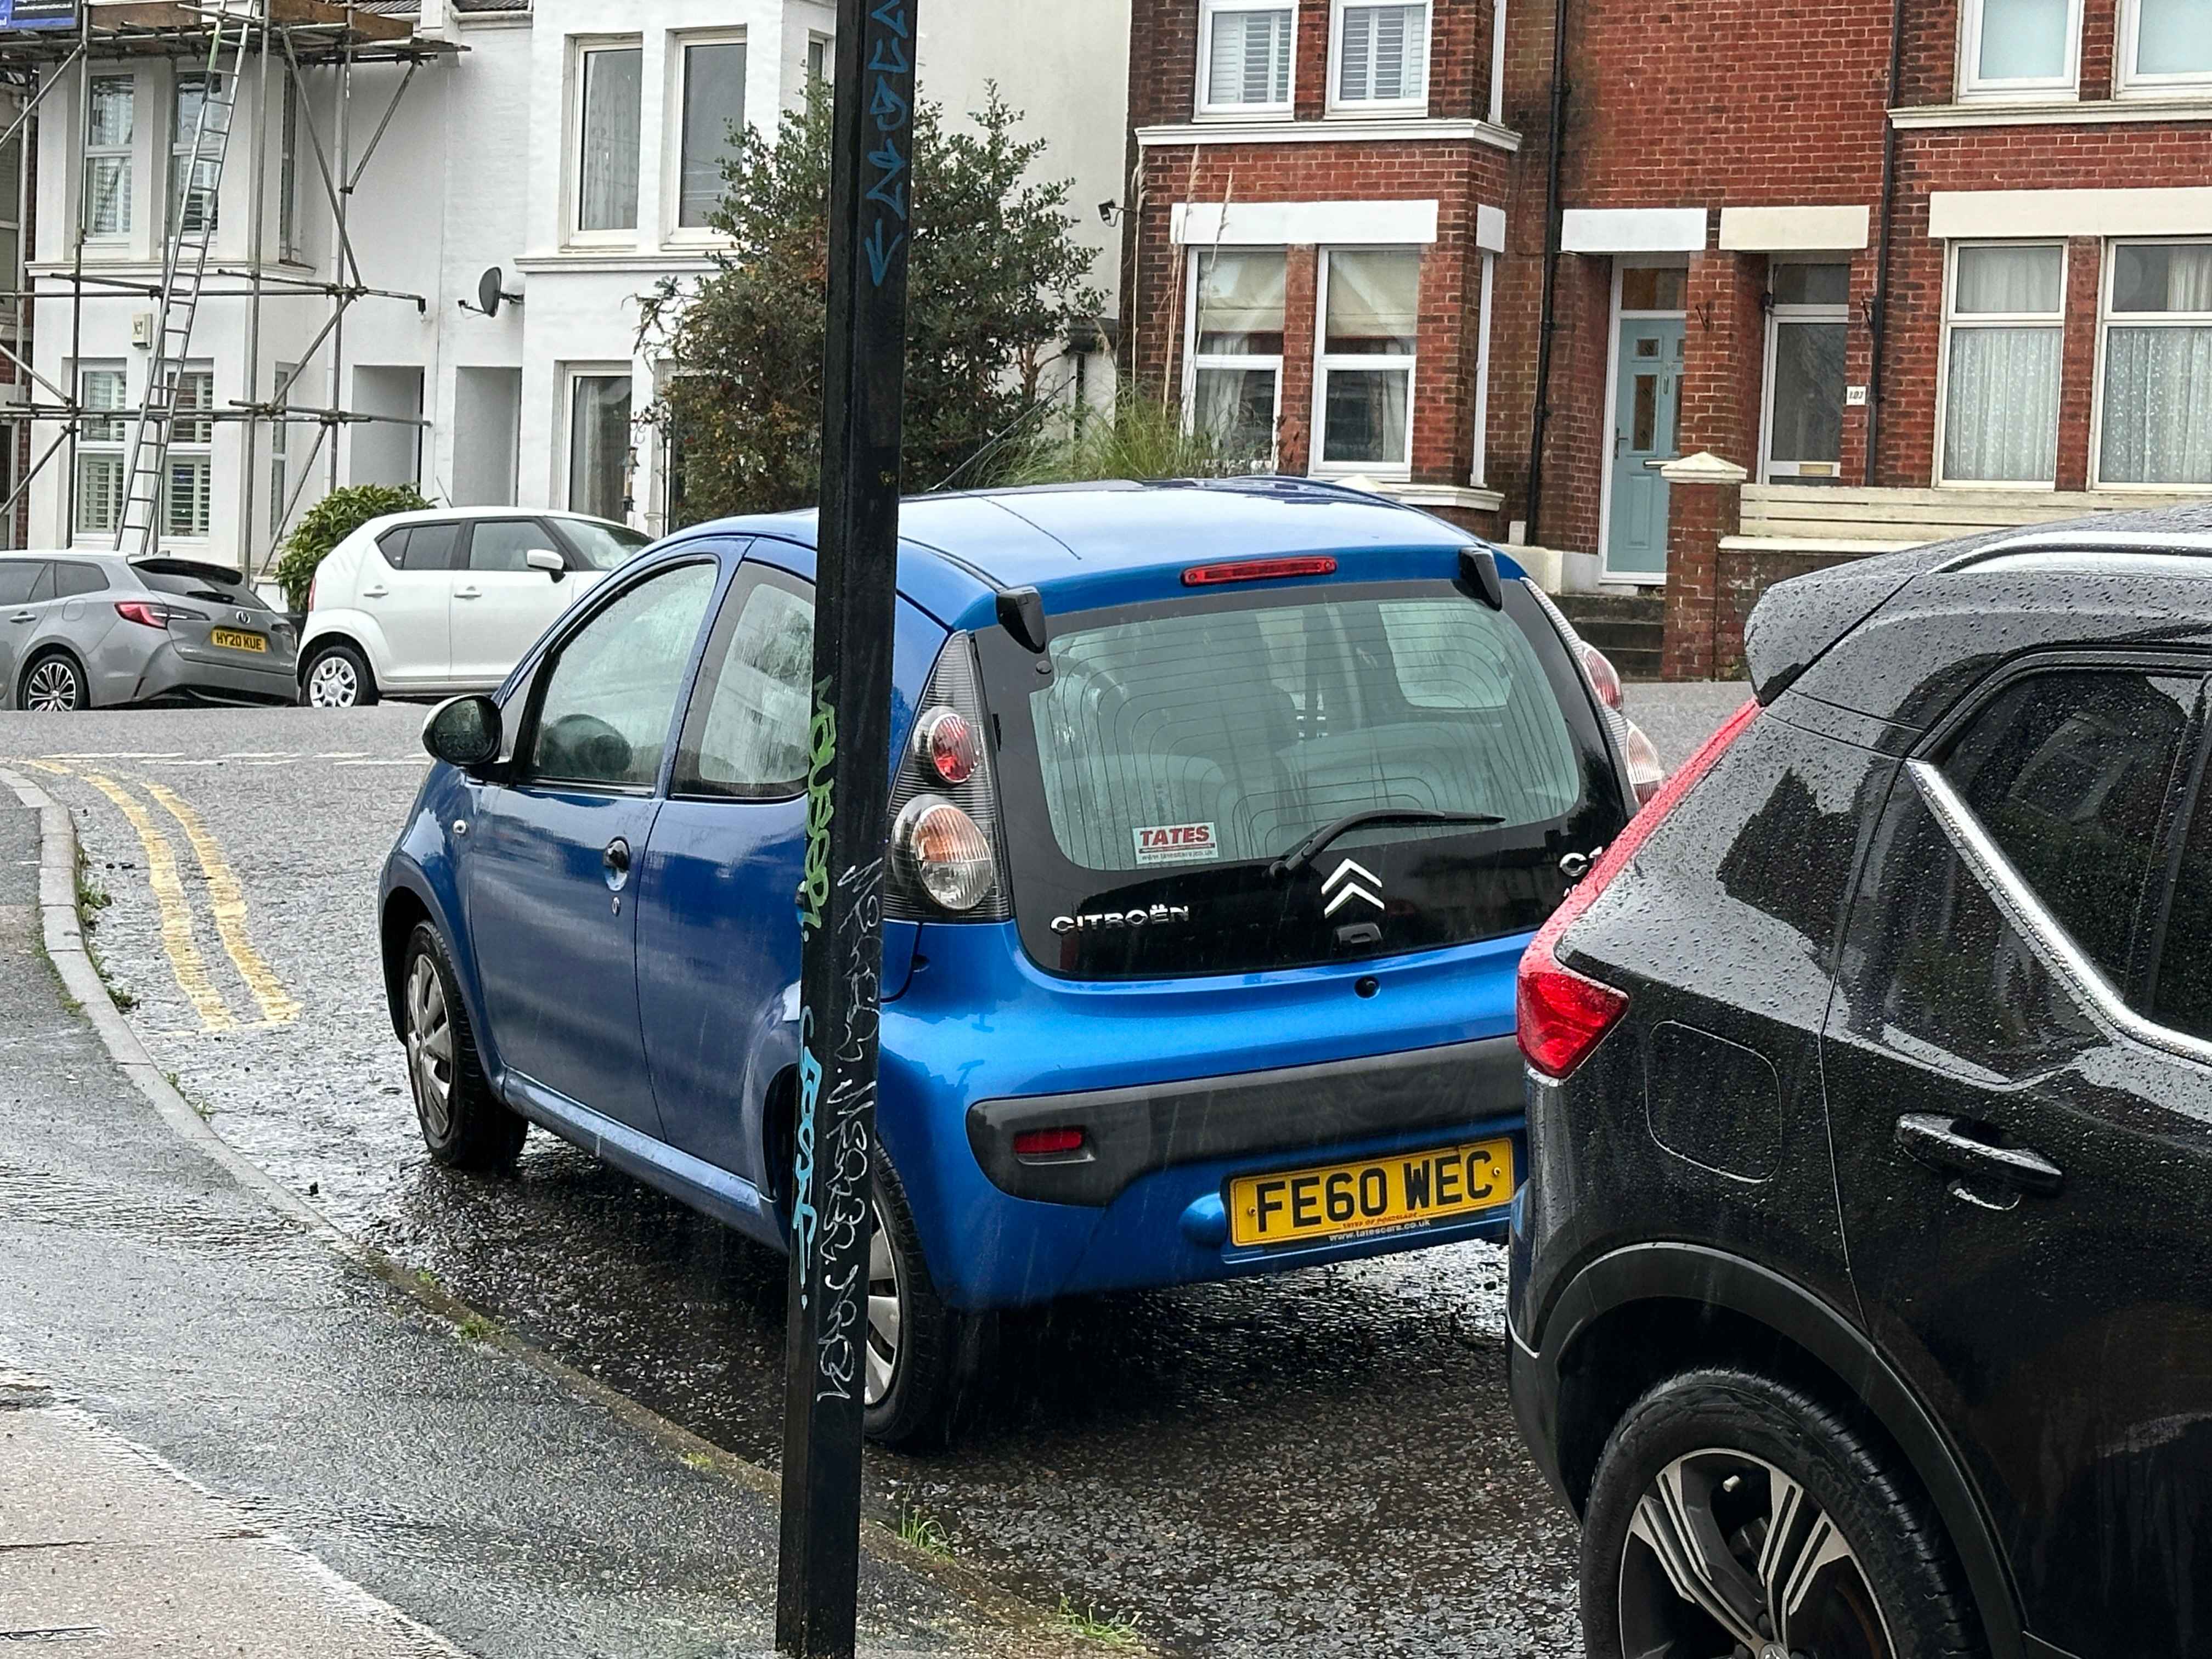 Photograph of FE60 WEC - a Blue Citroen C1 parked in Hollingdean by a non-resident. The eighth of ten photographs supplied by the residents of Hollingdean.